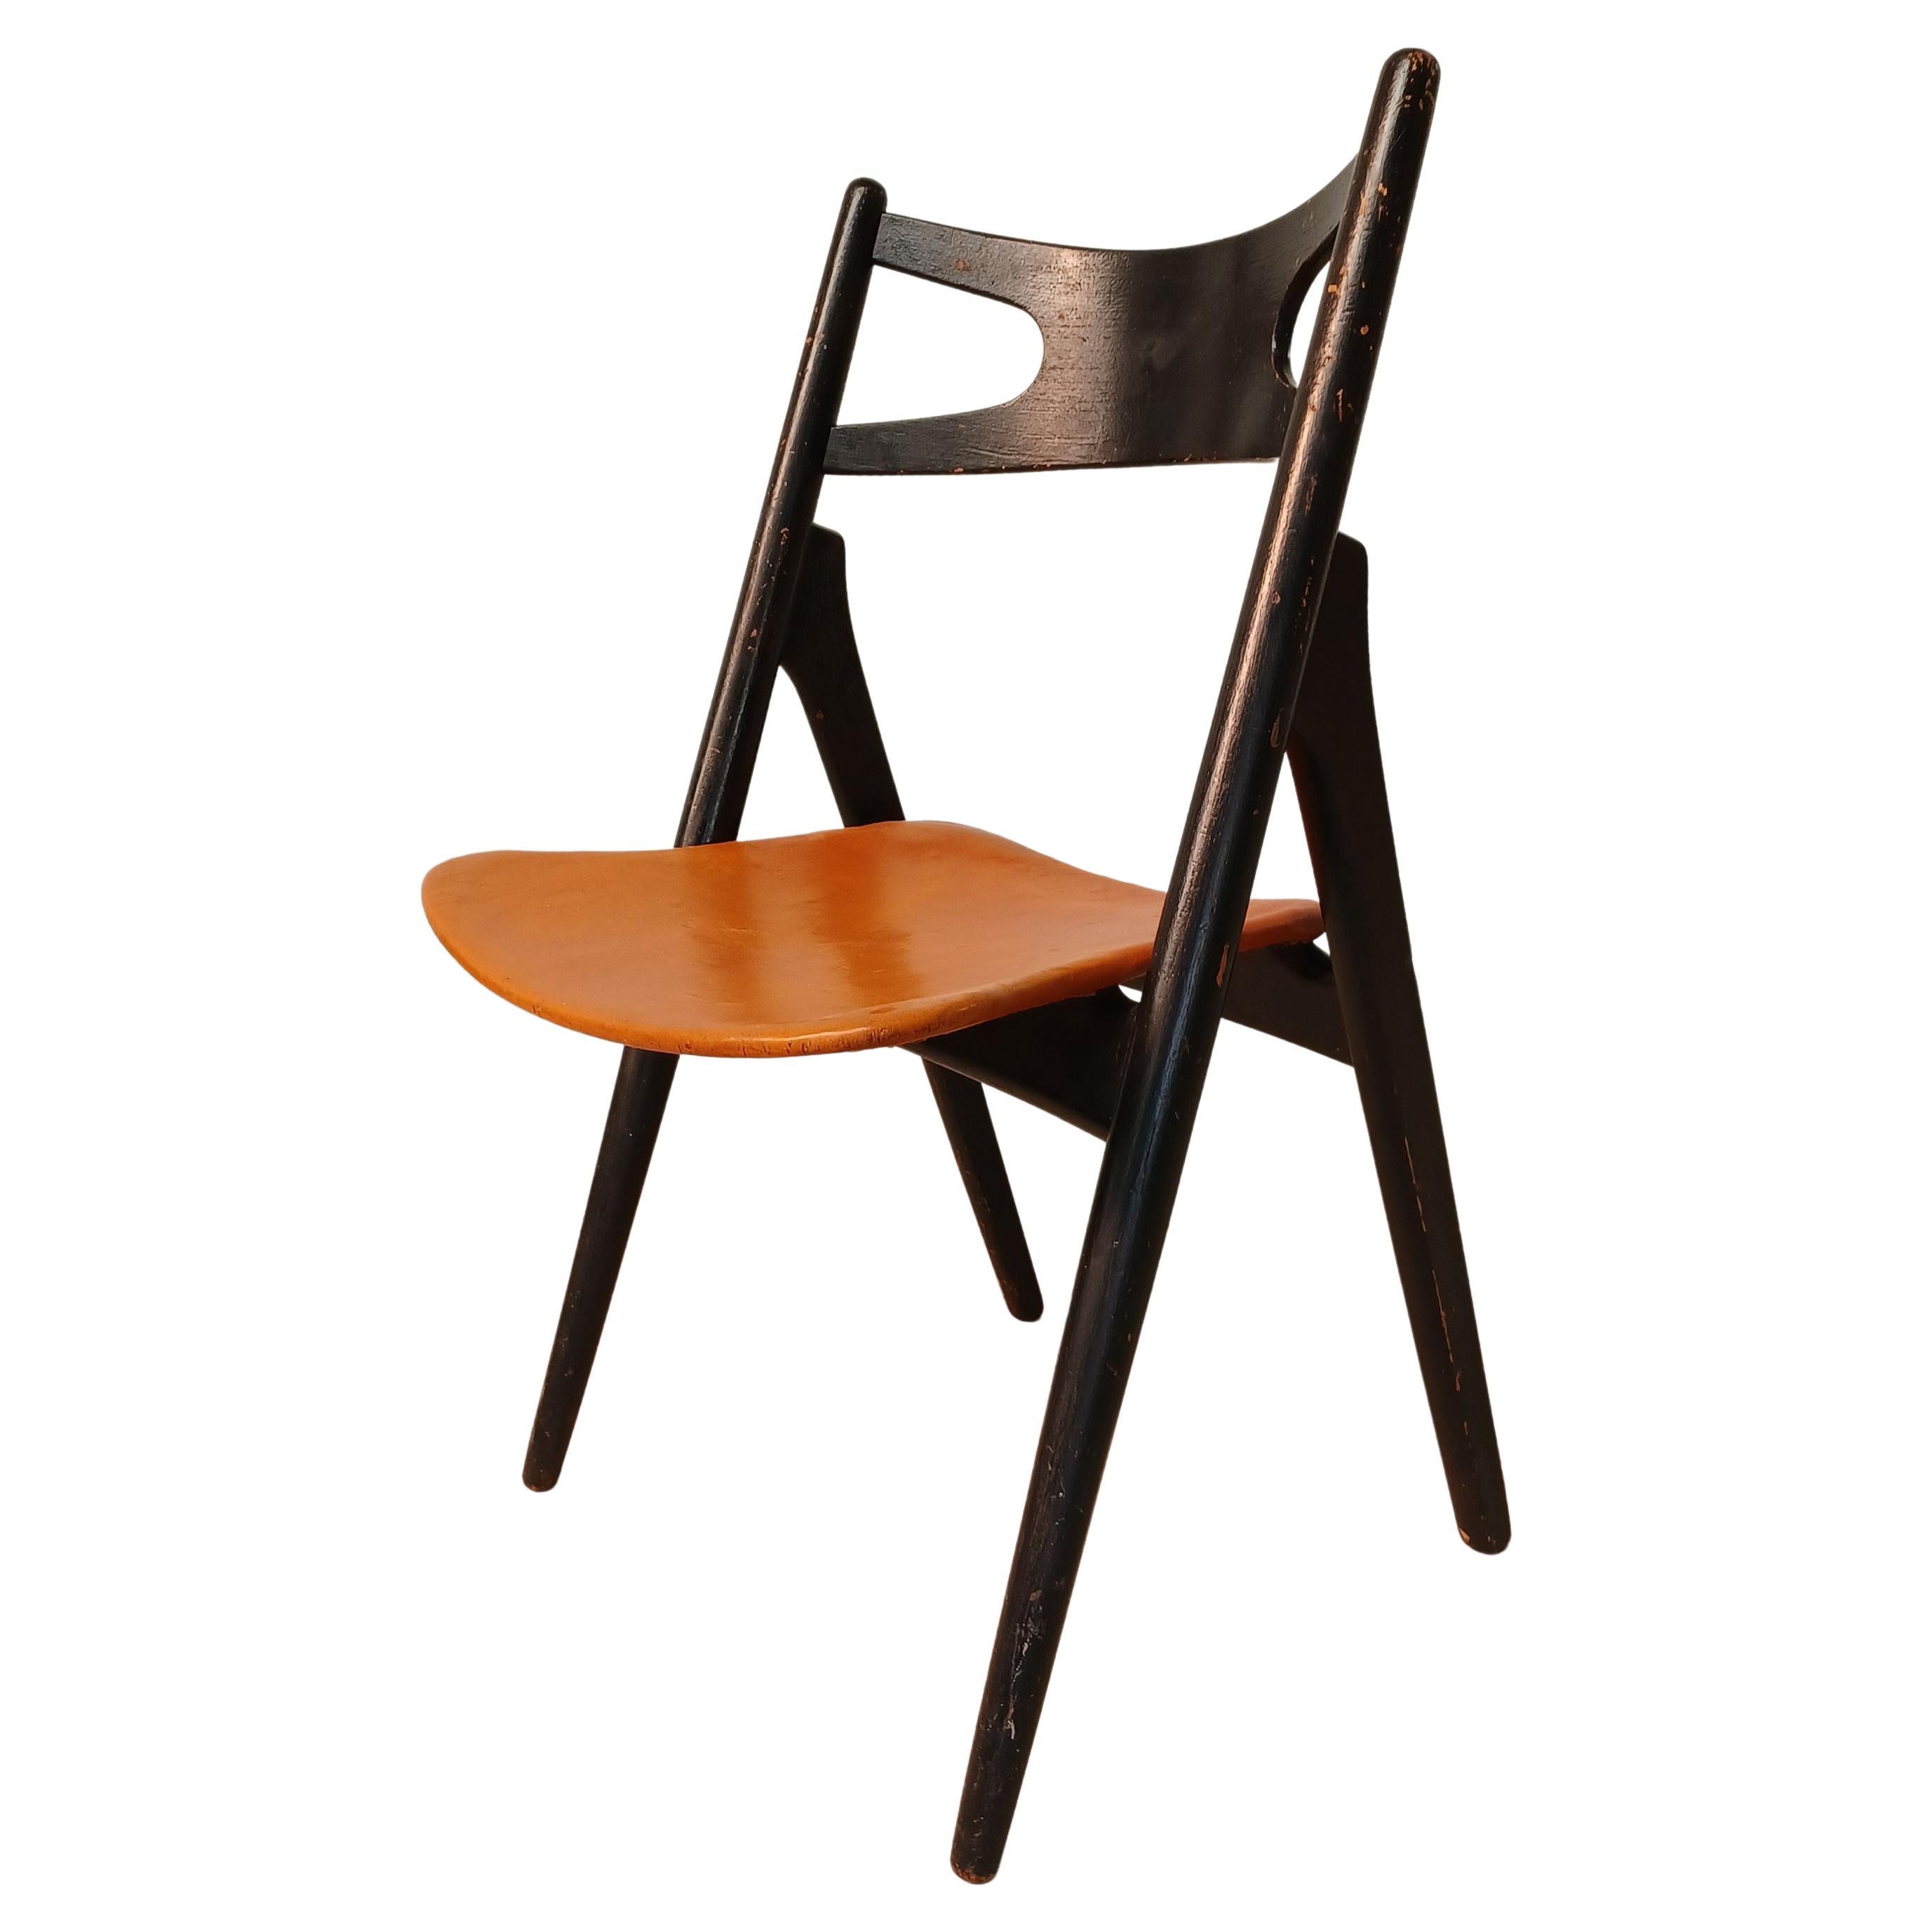 1950´s Patinated Hans Wegner Sawbuck Chair with Original Leather